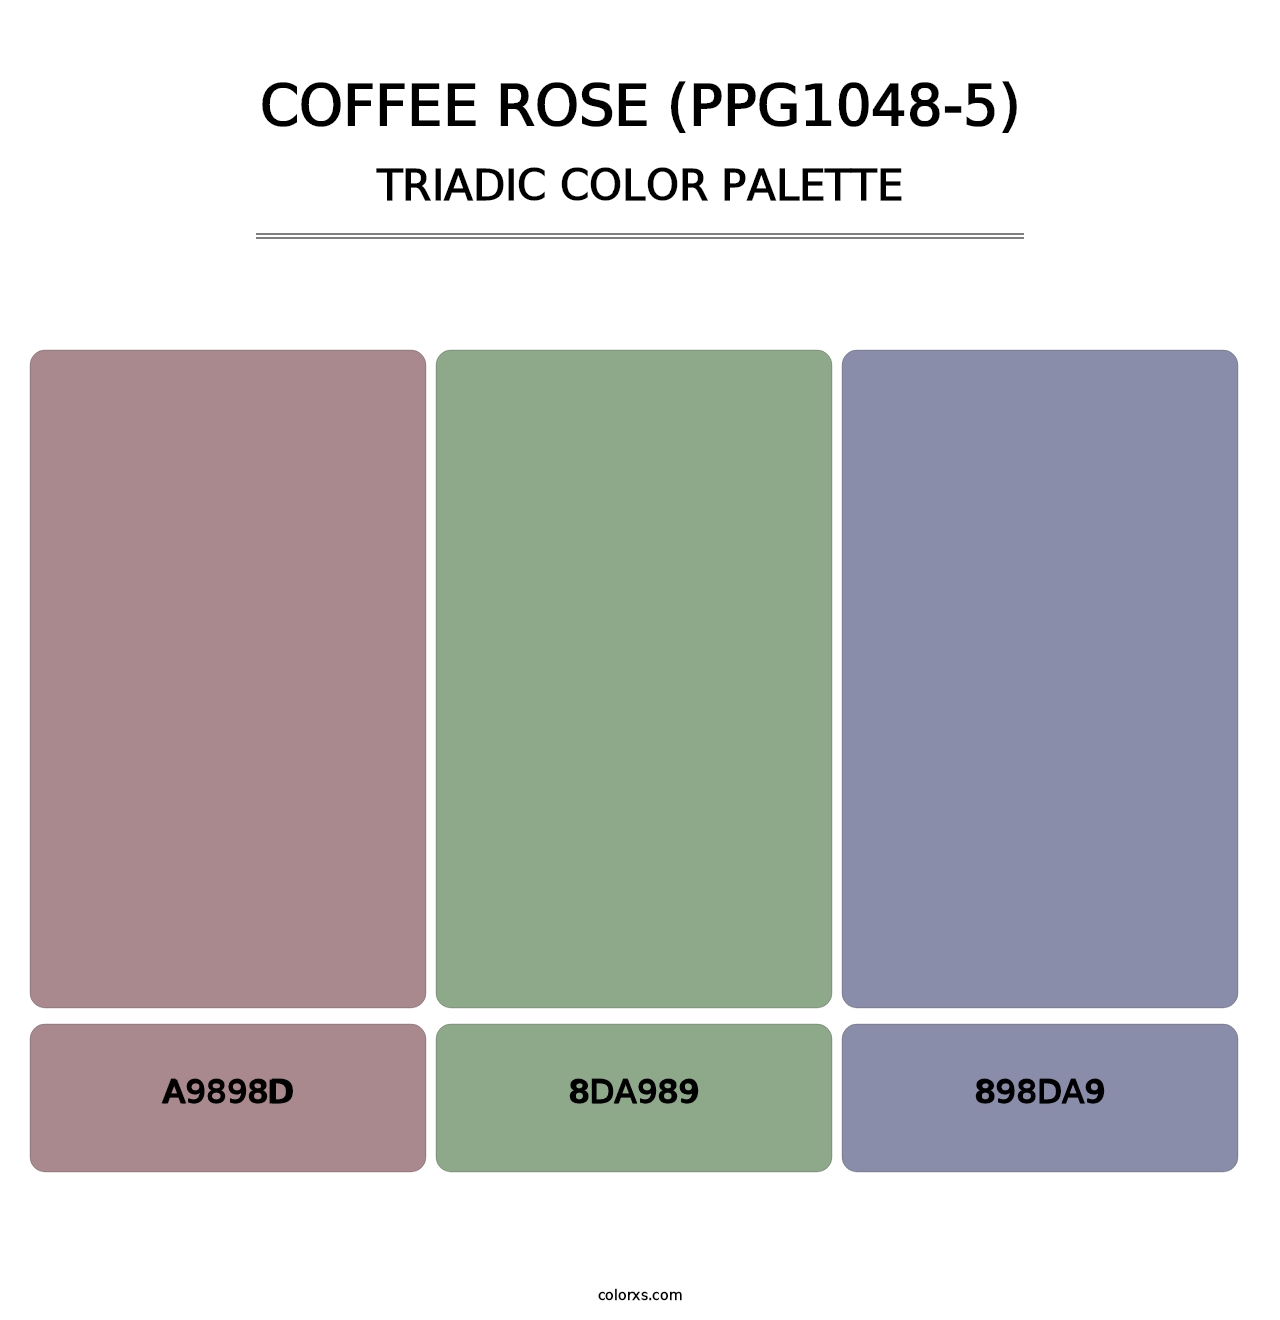 Coffee Rose (PPG1048-5) - Triadic Color Palette